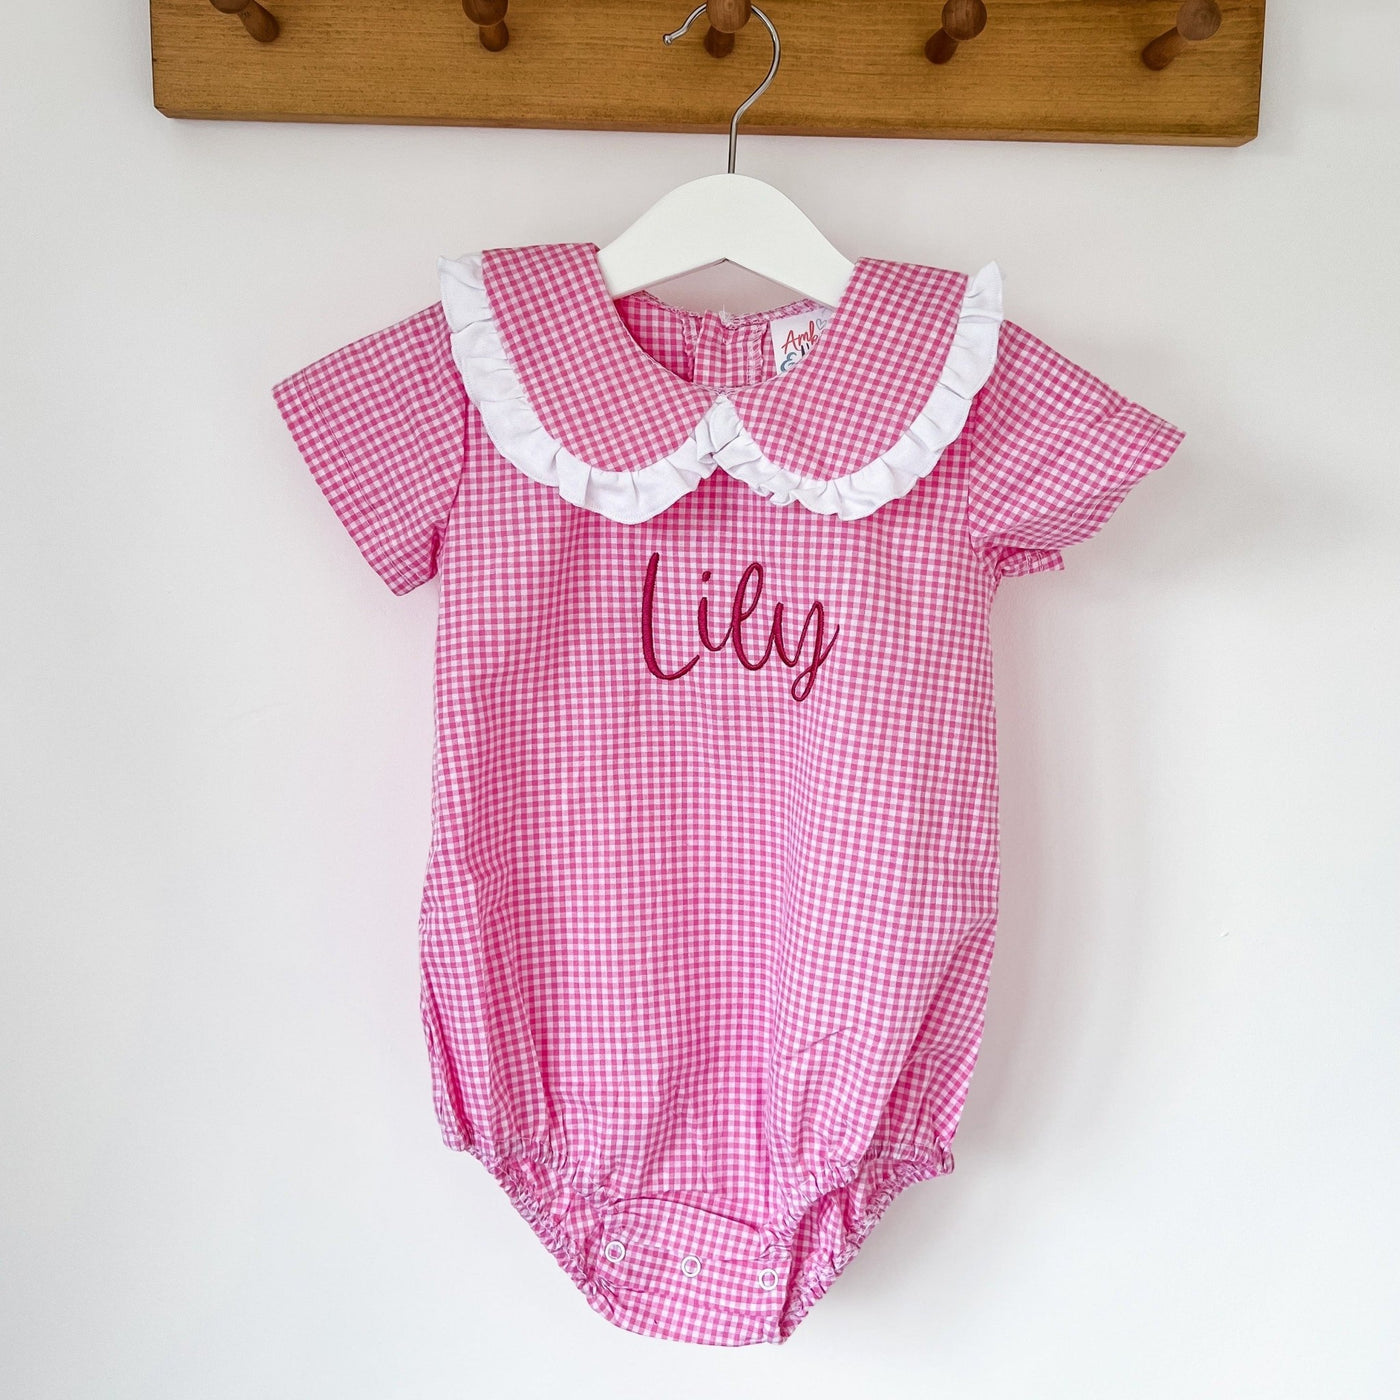 Pink Gingham Short Sleeve Personalised Romper - Amber and Noah